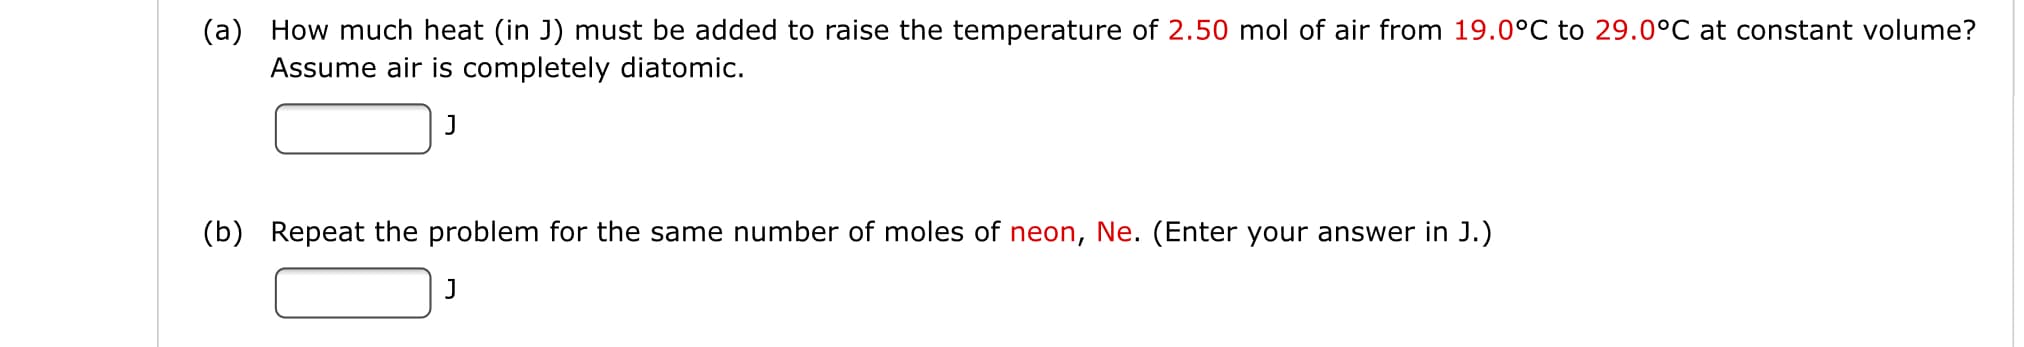 (a) How much heat (in J) must be added to raise the temperature of 2.50 mol of air from 19.0°C to 29.0°C at constant volume?
Assume air iss completely diatomic.
J
(b) Repeat the problem for the same number of moles of neon, Ne. (Enter your answer in J.)
J
